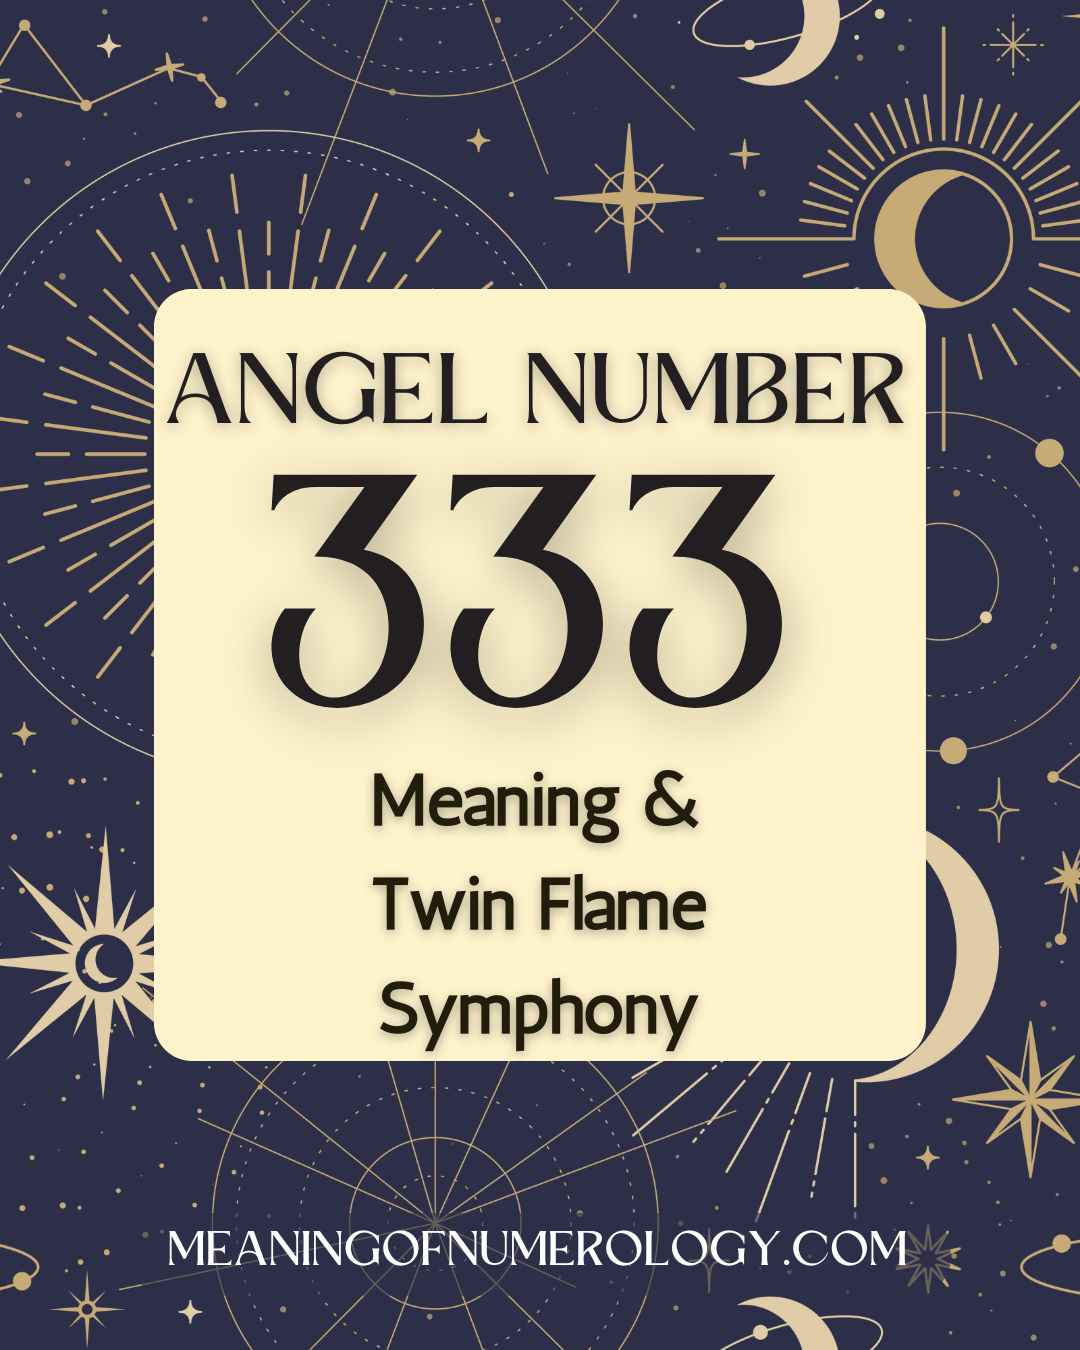 Purple Mystic Astrology Moon Angel Number 333 Meaning & Twin Flame Symphony